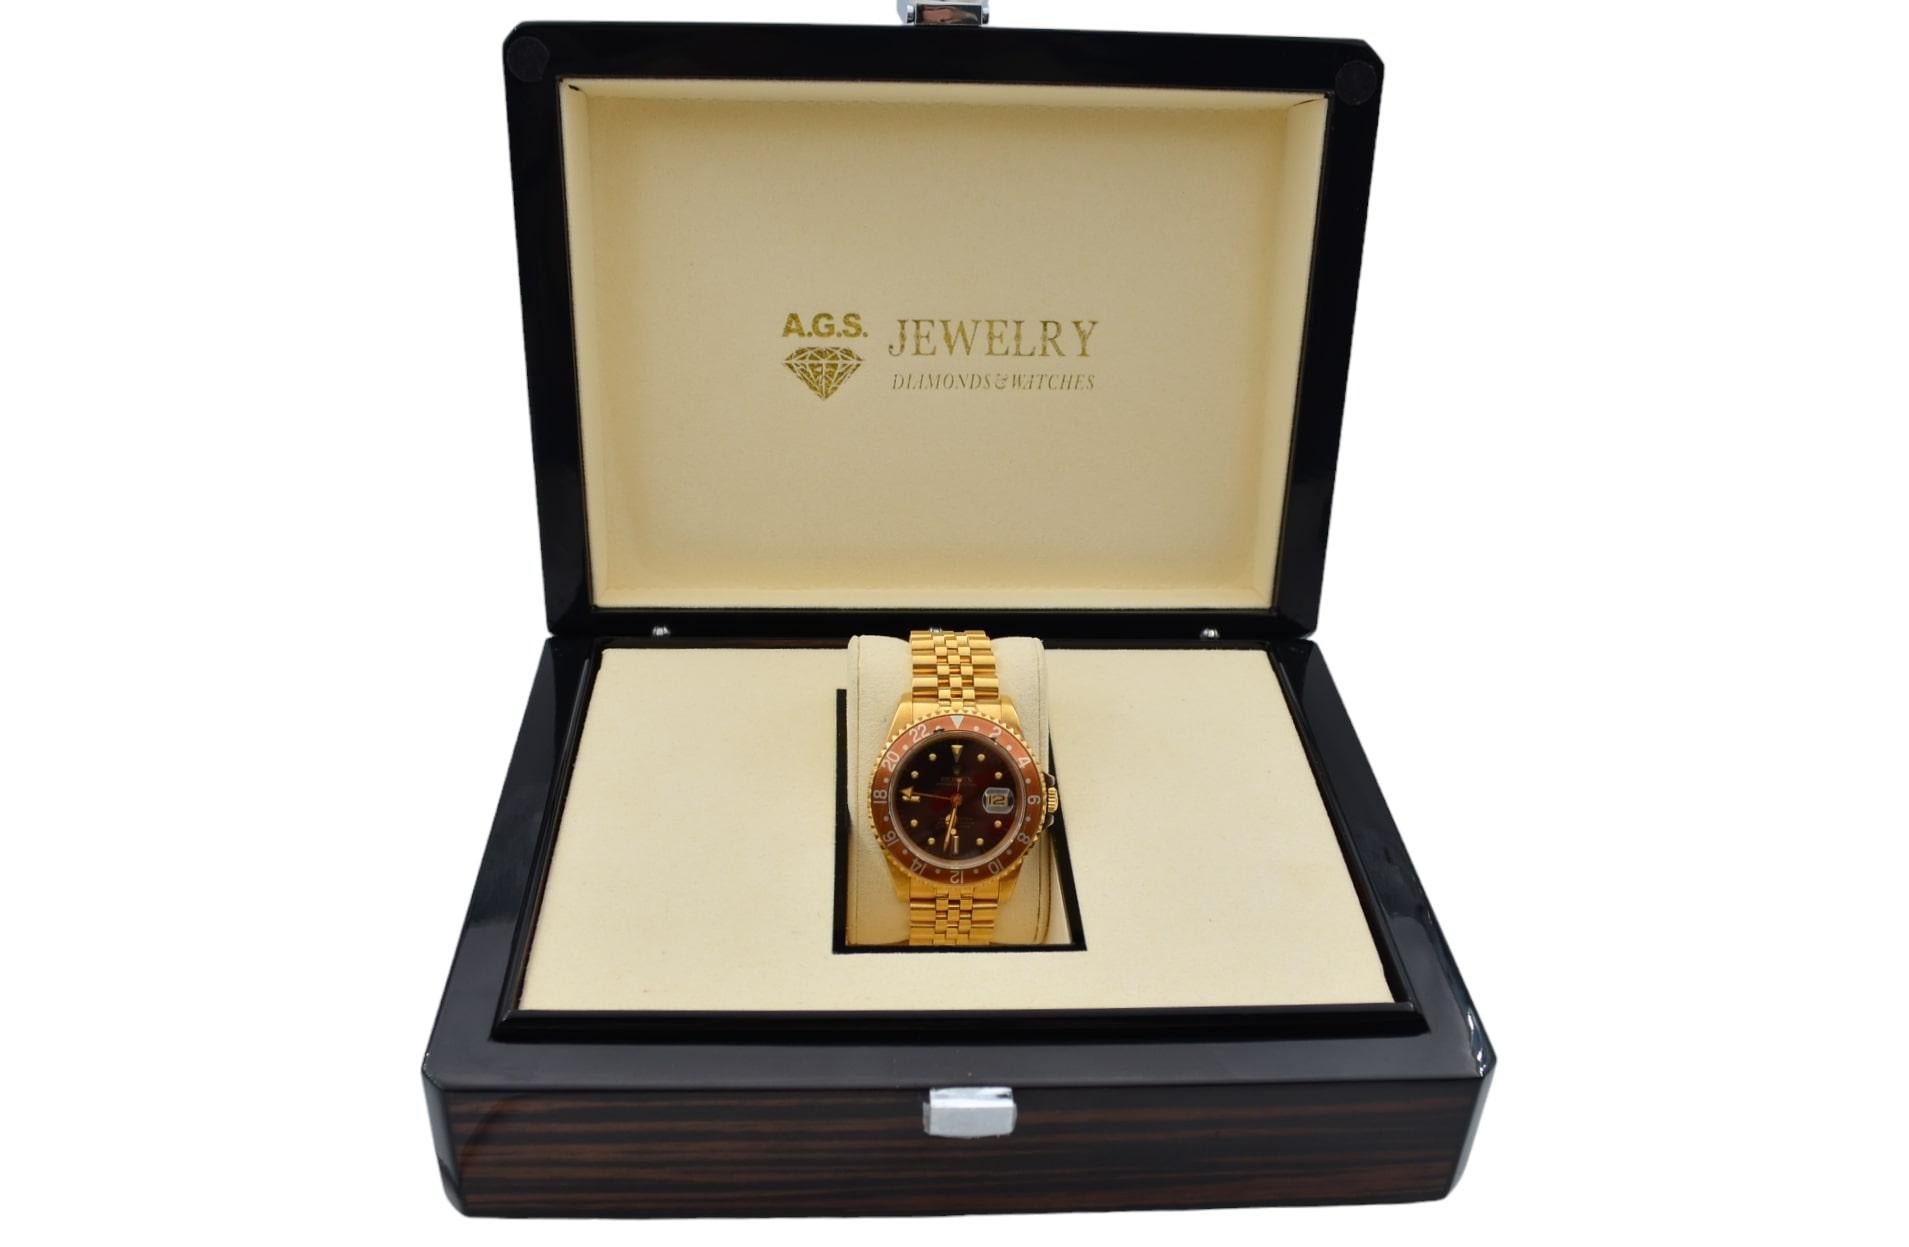 The watch is in a good condition and it’s working well. The total lenght of the bracelet (case+bracelet) is 17.5cm. It shows signs of wear and scratches. The watch comes with an AGS Jewelry wooden box, along with an AGS Jewelry warranty card. For